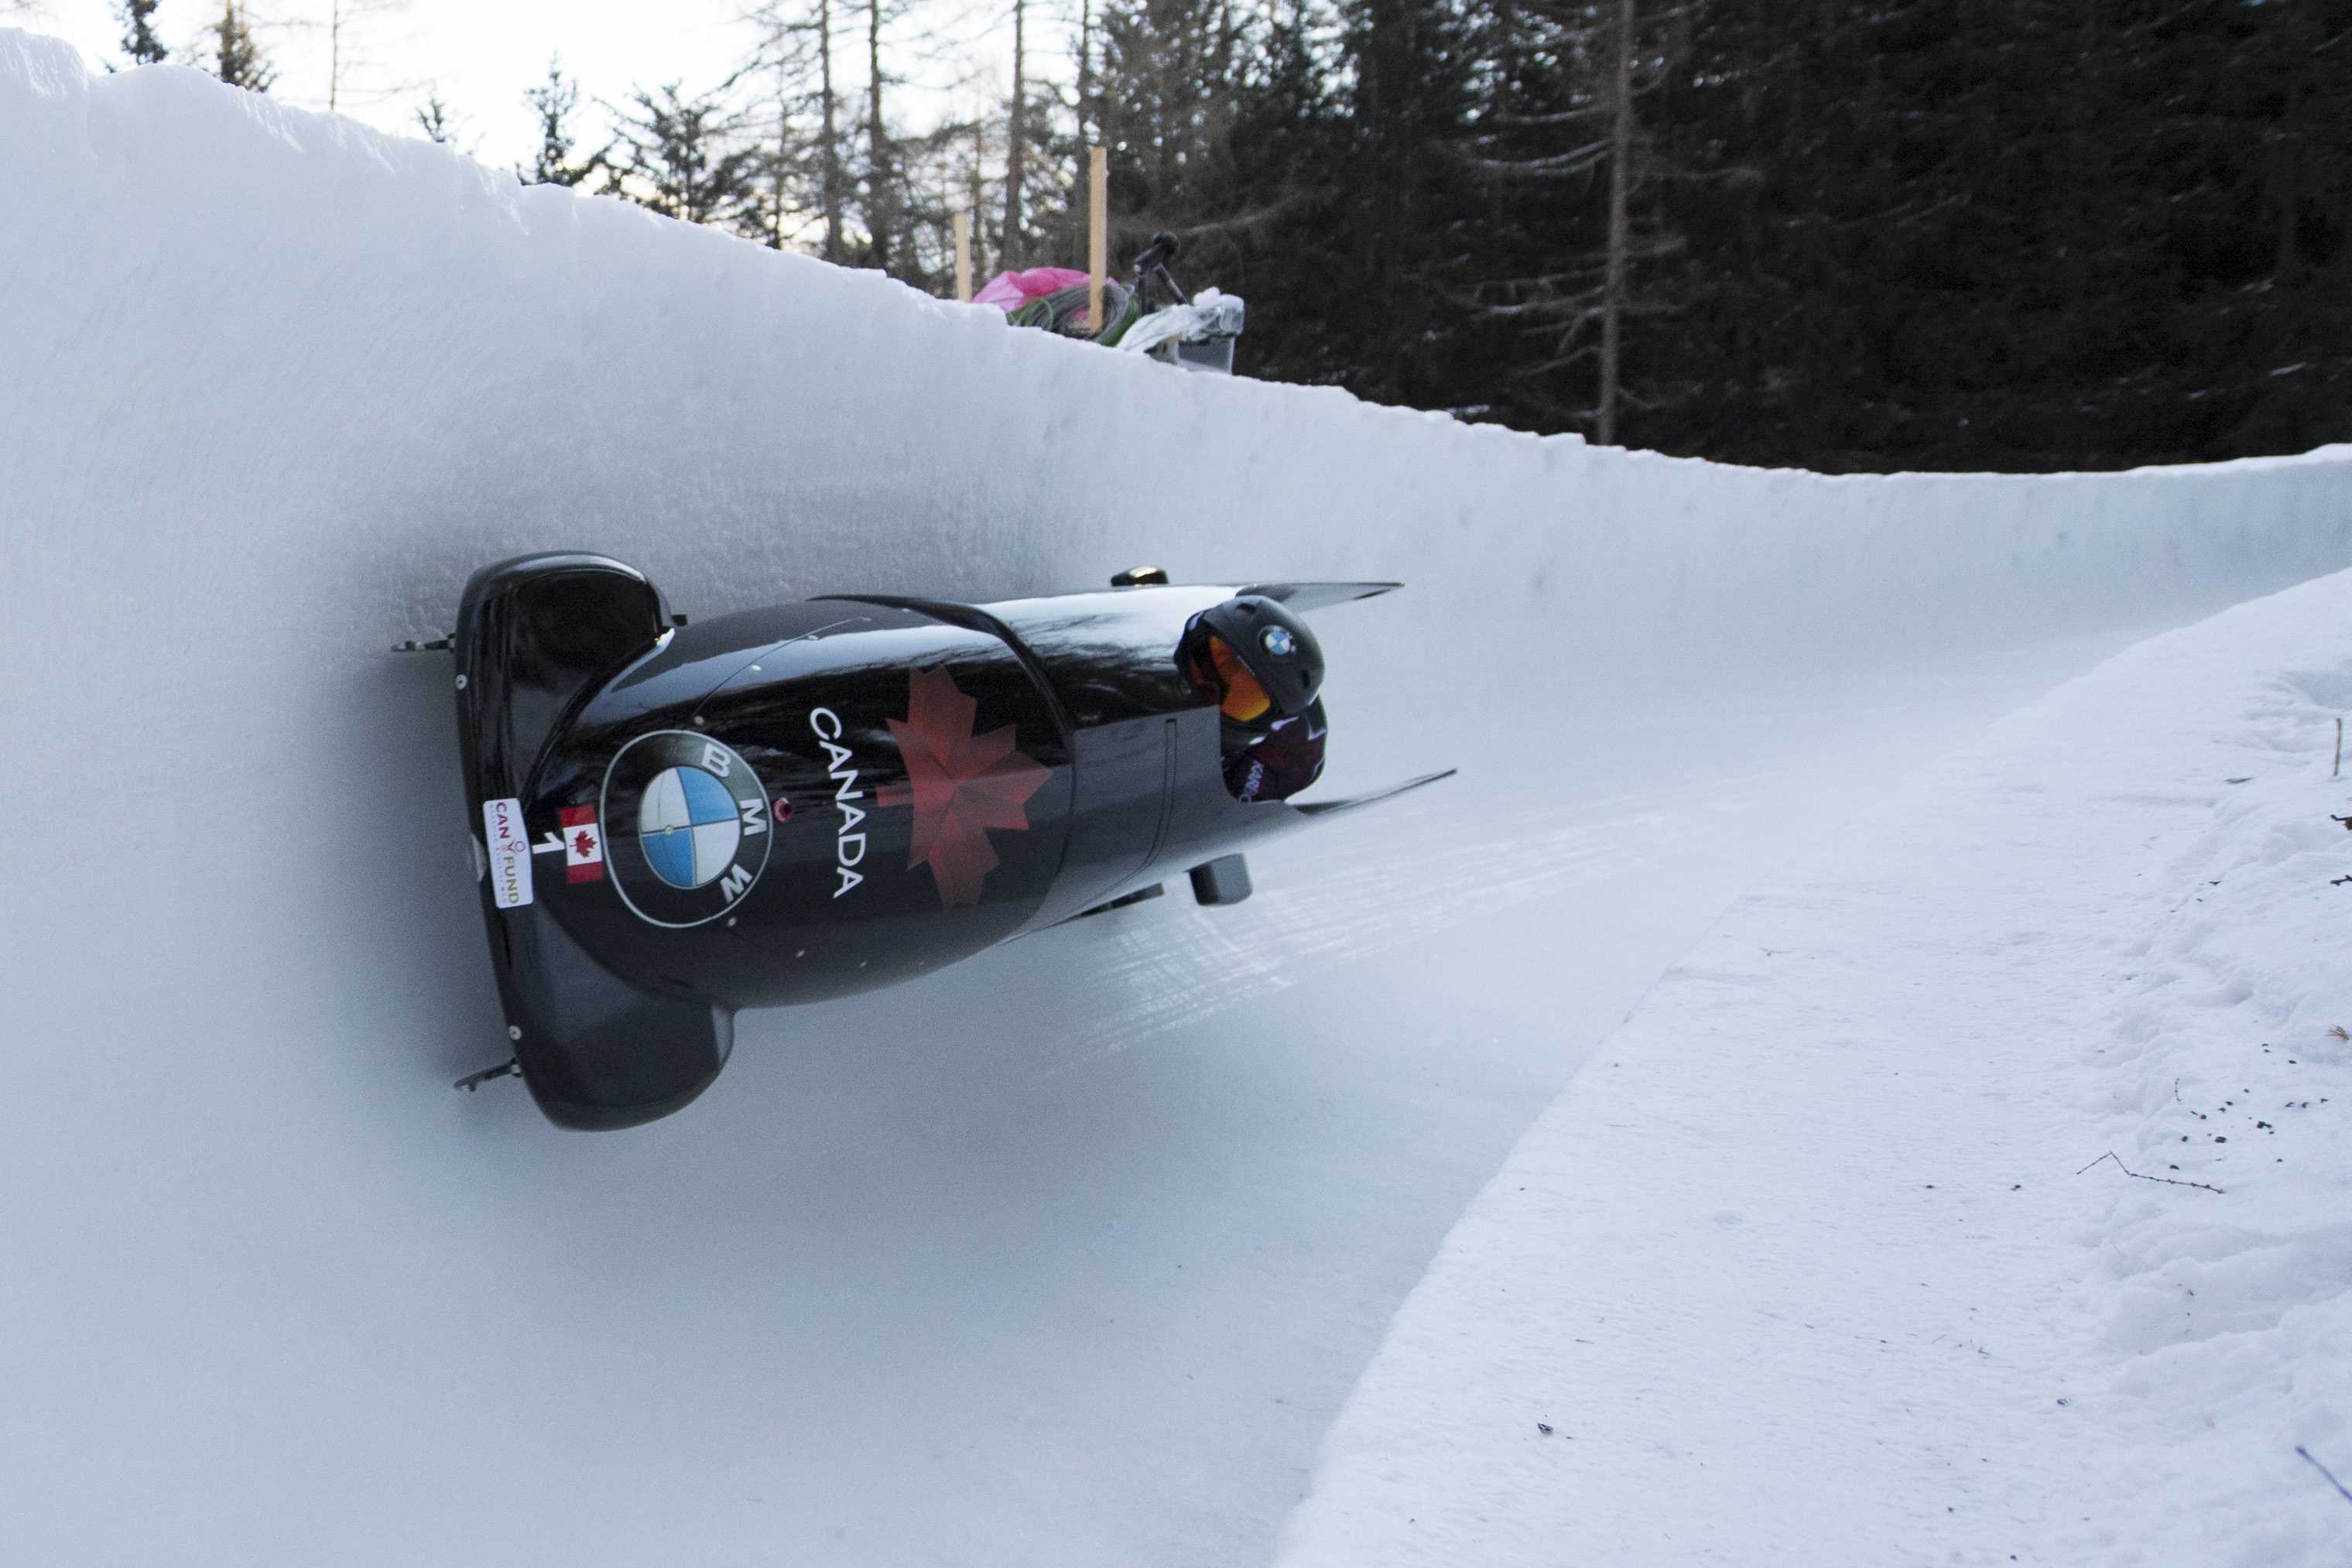 Kaillie Humphries and Melissa Lotholz from Canada speed down the course during the women' two-man bobsled World Cup in St. Moritz, Switzerland, Saturday, Jan. 21, 2017. (Urs Flueeler/Keystone via AP)